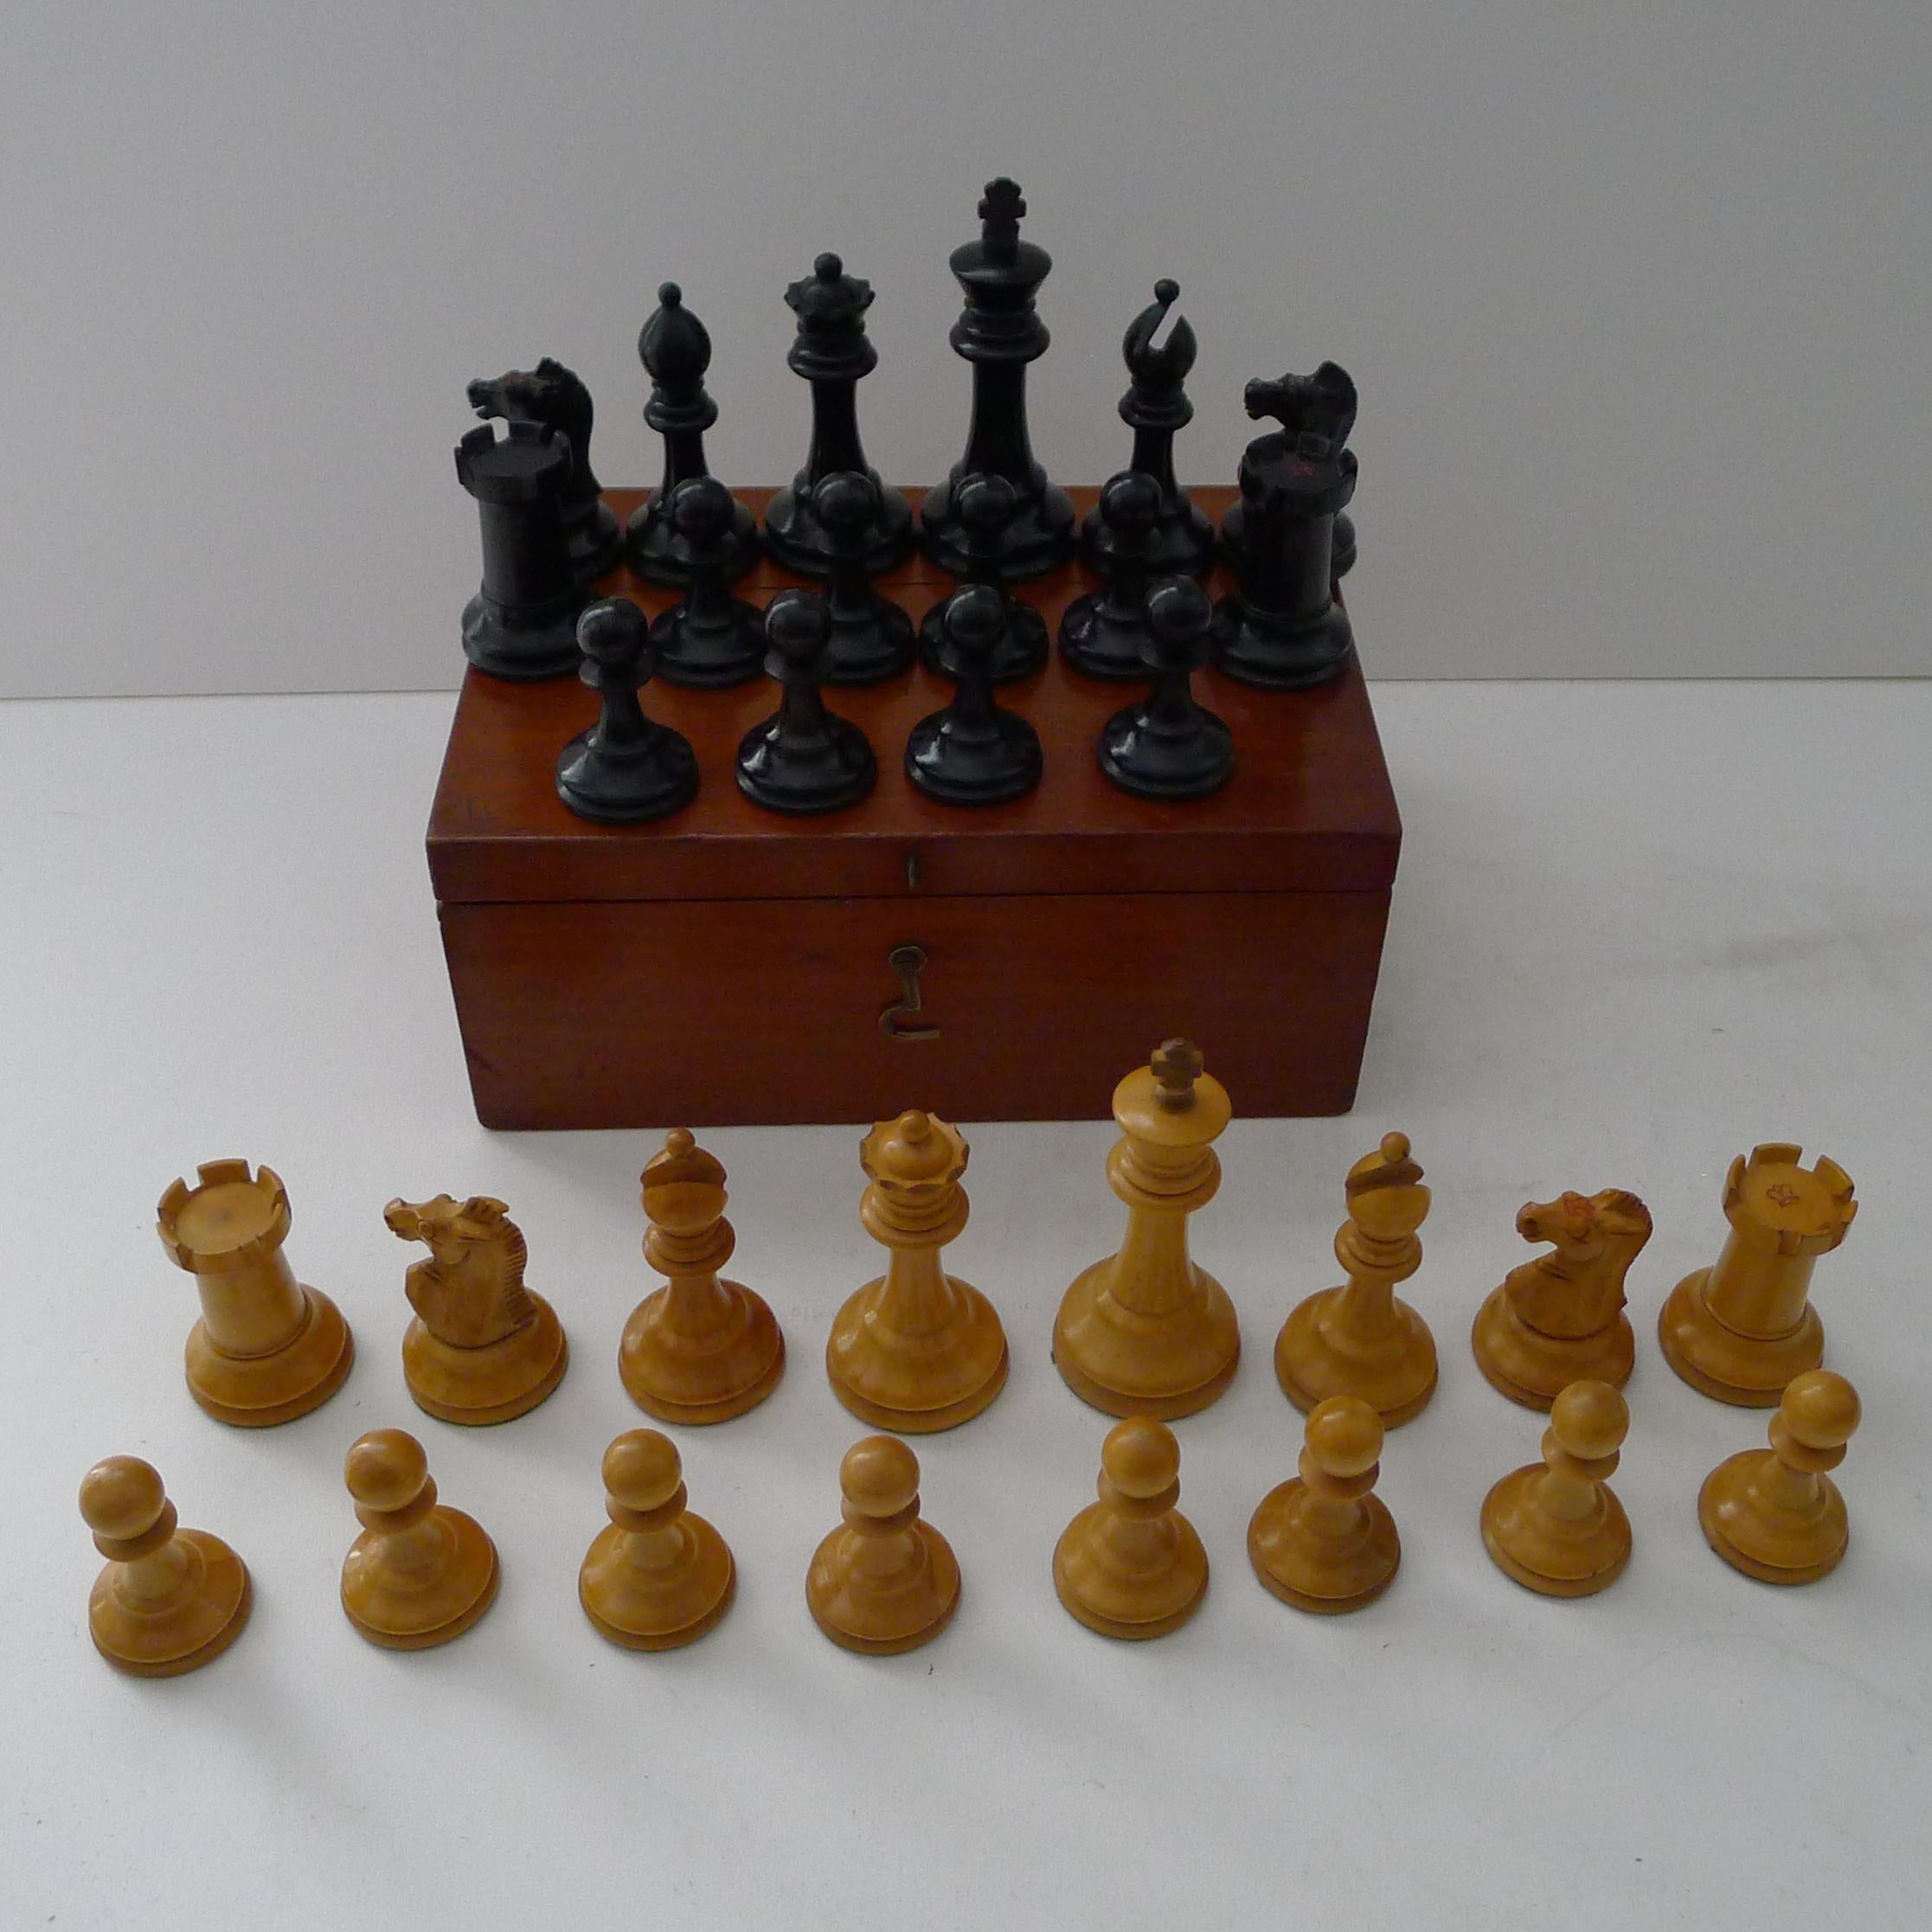 Antique English Staunton Chess Set With Red Crown Marks c.1900 For Sale 1